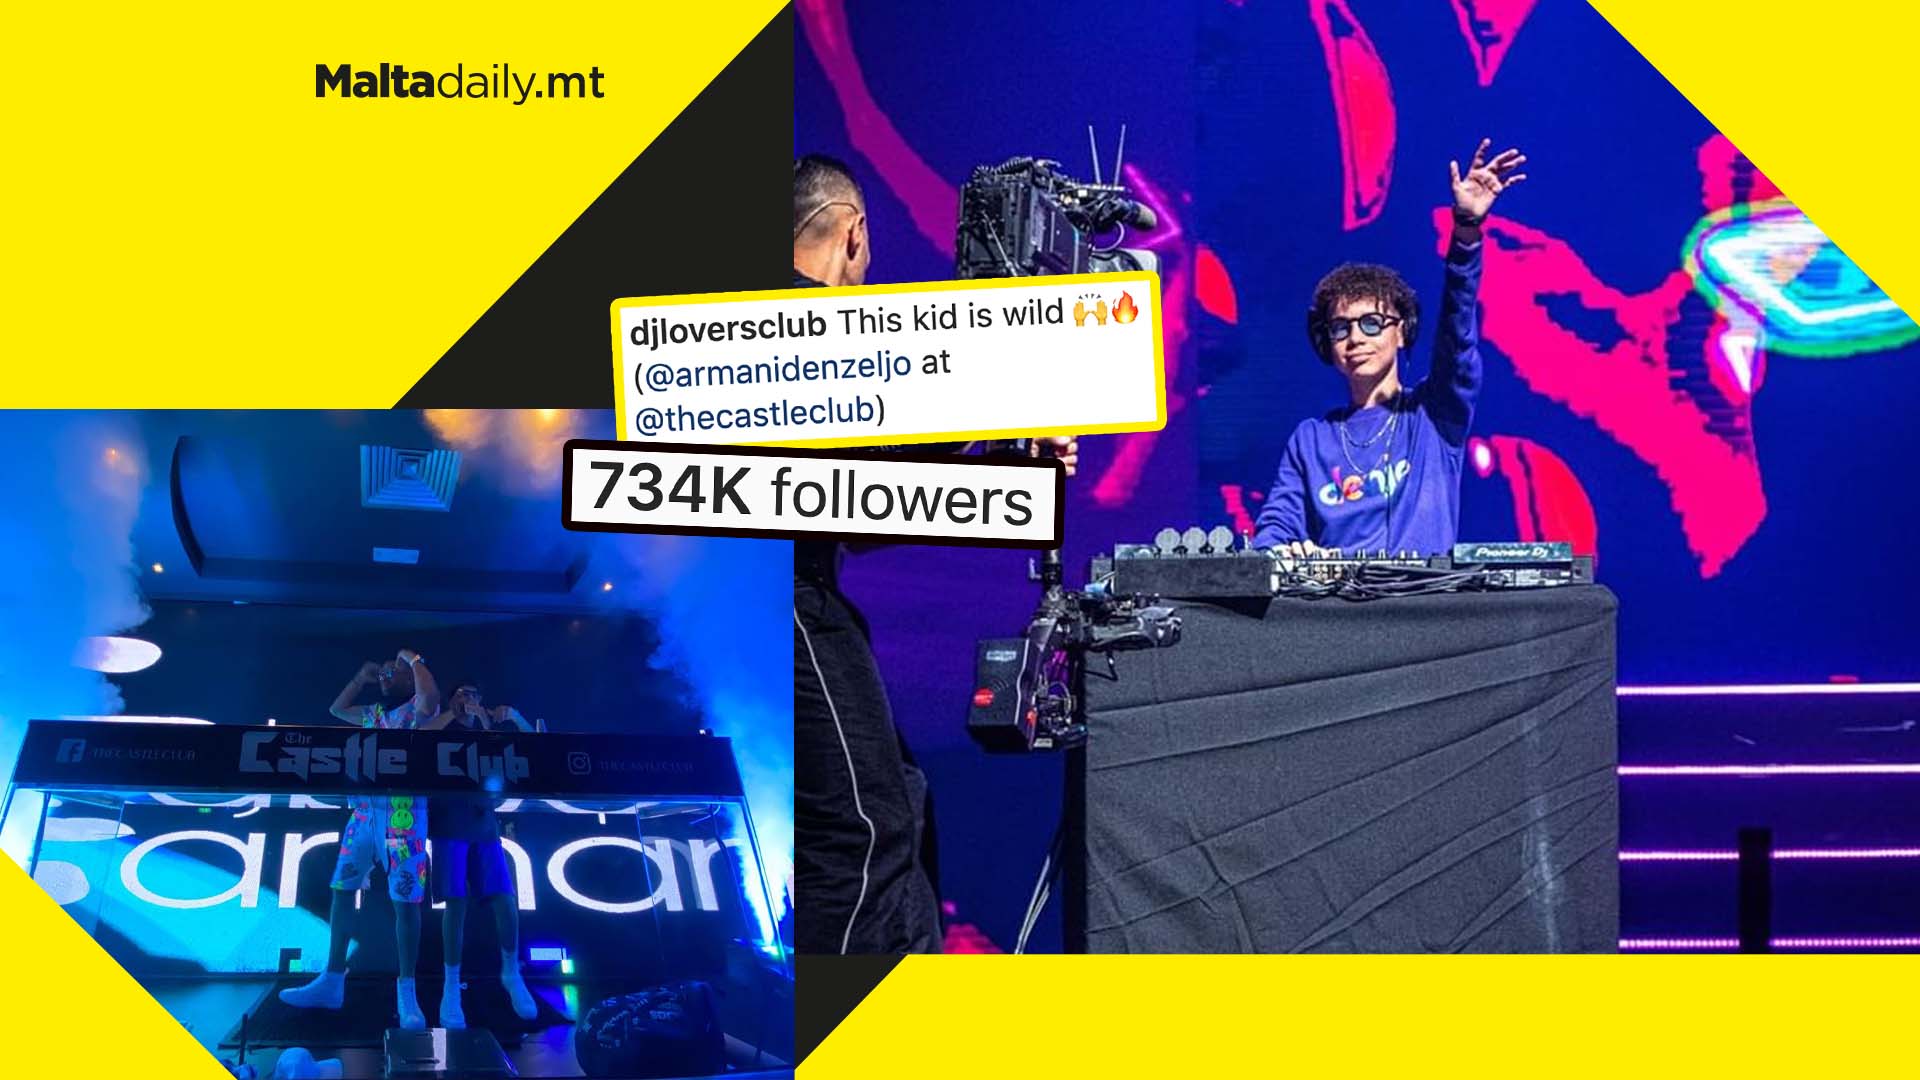 15-year-old Denzel Jo Armani featured on popular platform after DJing in Ayia Napa